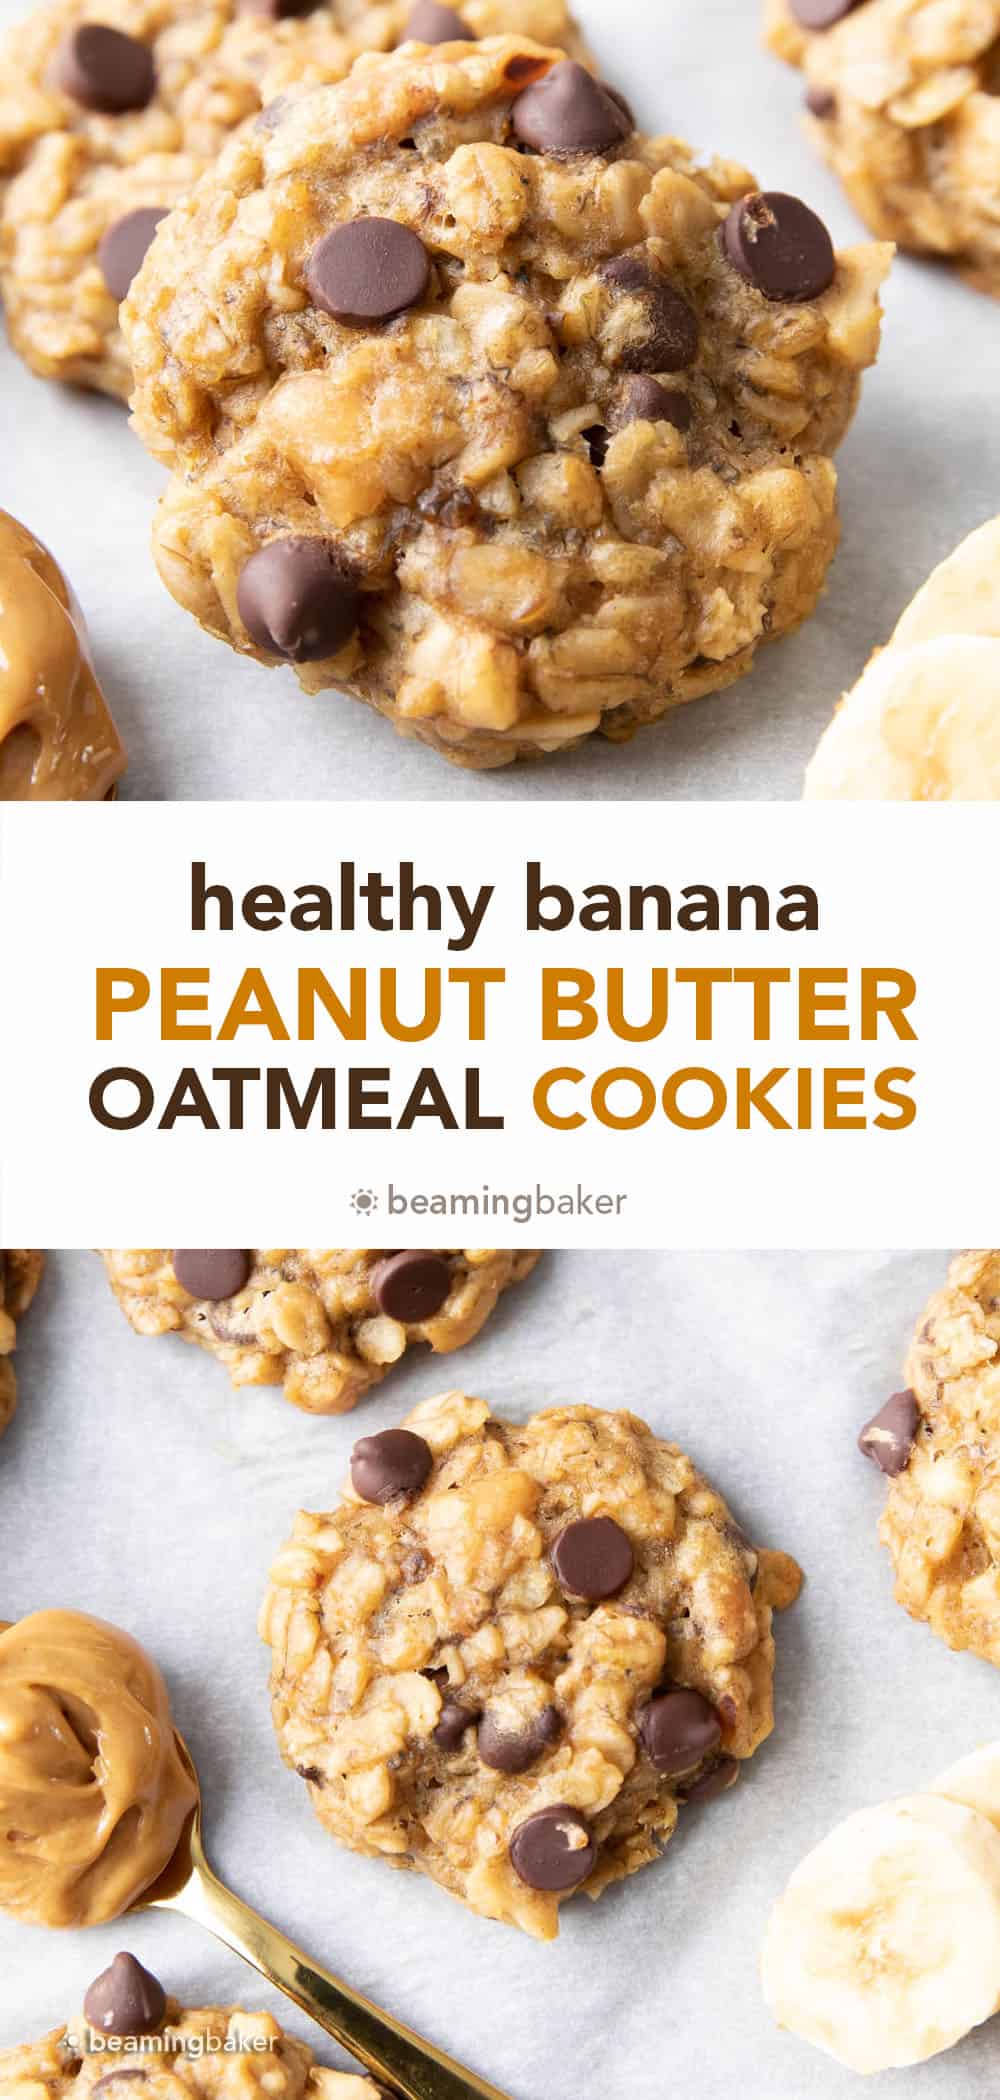 Peanut Butter Banana Oatmeal Cookies: quick ‘n easy healthy peanut butter banana oatmeal cookies! Bursting with delicious peanut butter and banana flavors. #OatmealCookies #PeanutButter #Banana #Healthy | Recipe at BeamingBaker.com